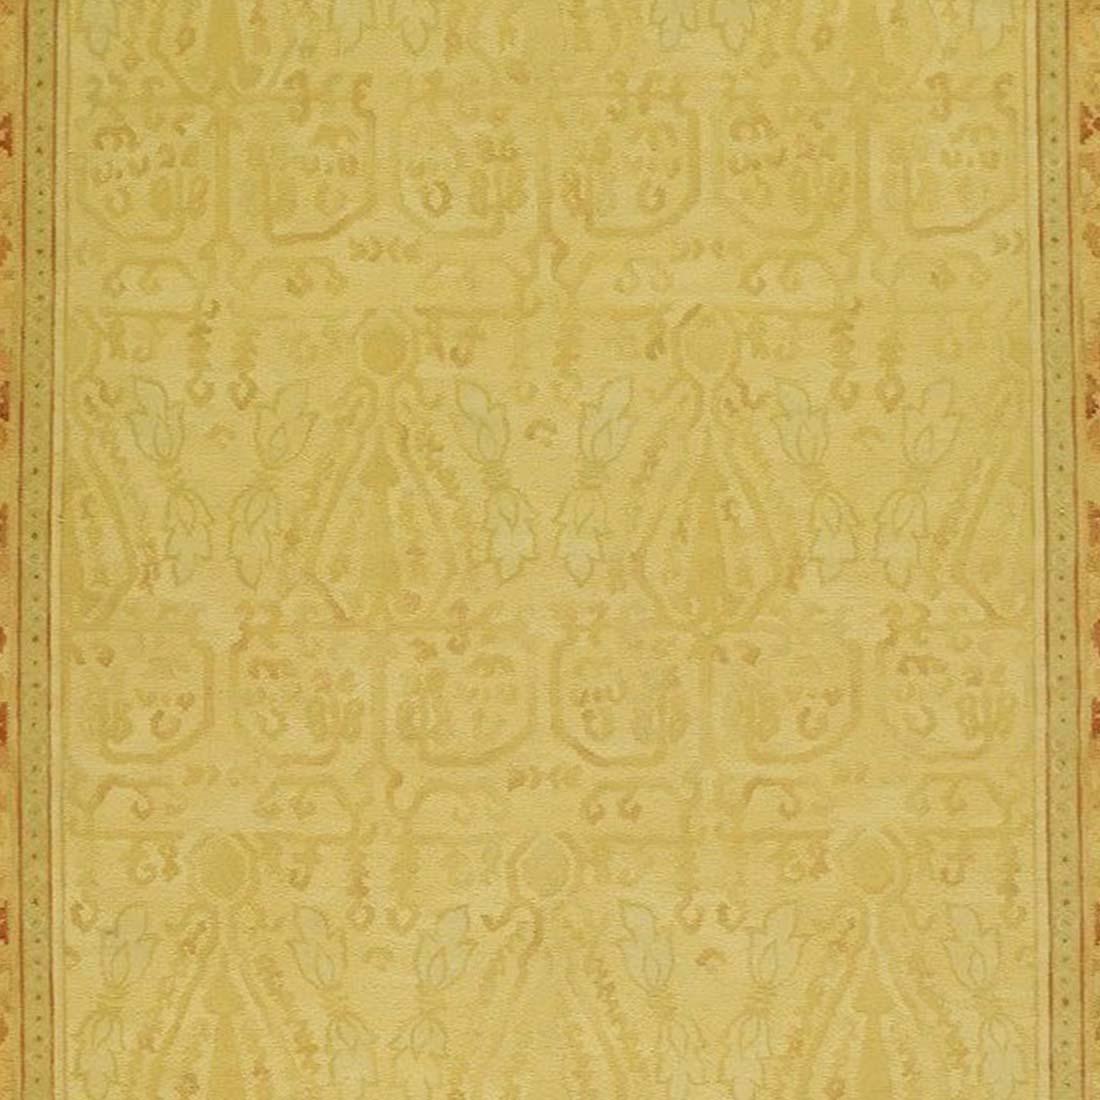 A medieval silk brocade with Saffavid and Andalusian influences inspired this saffron ground and amber tonal border. This hand made cut and loop pile rug was made by combining a loop weave invented by Asmara with the ancient French Savonnerie pile